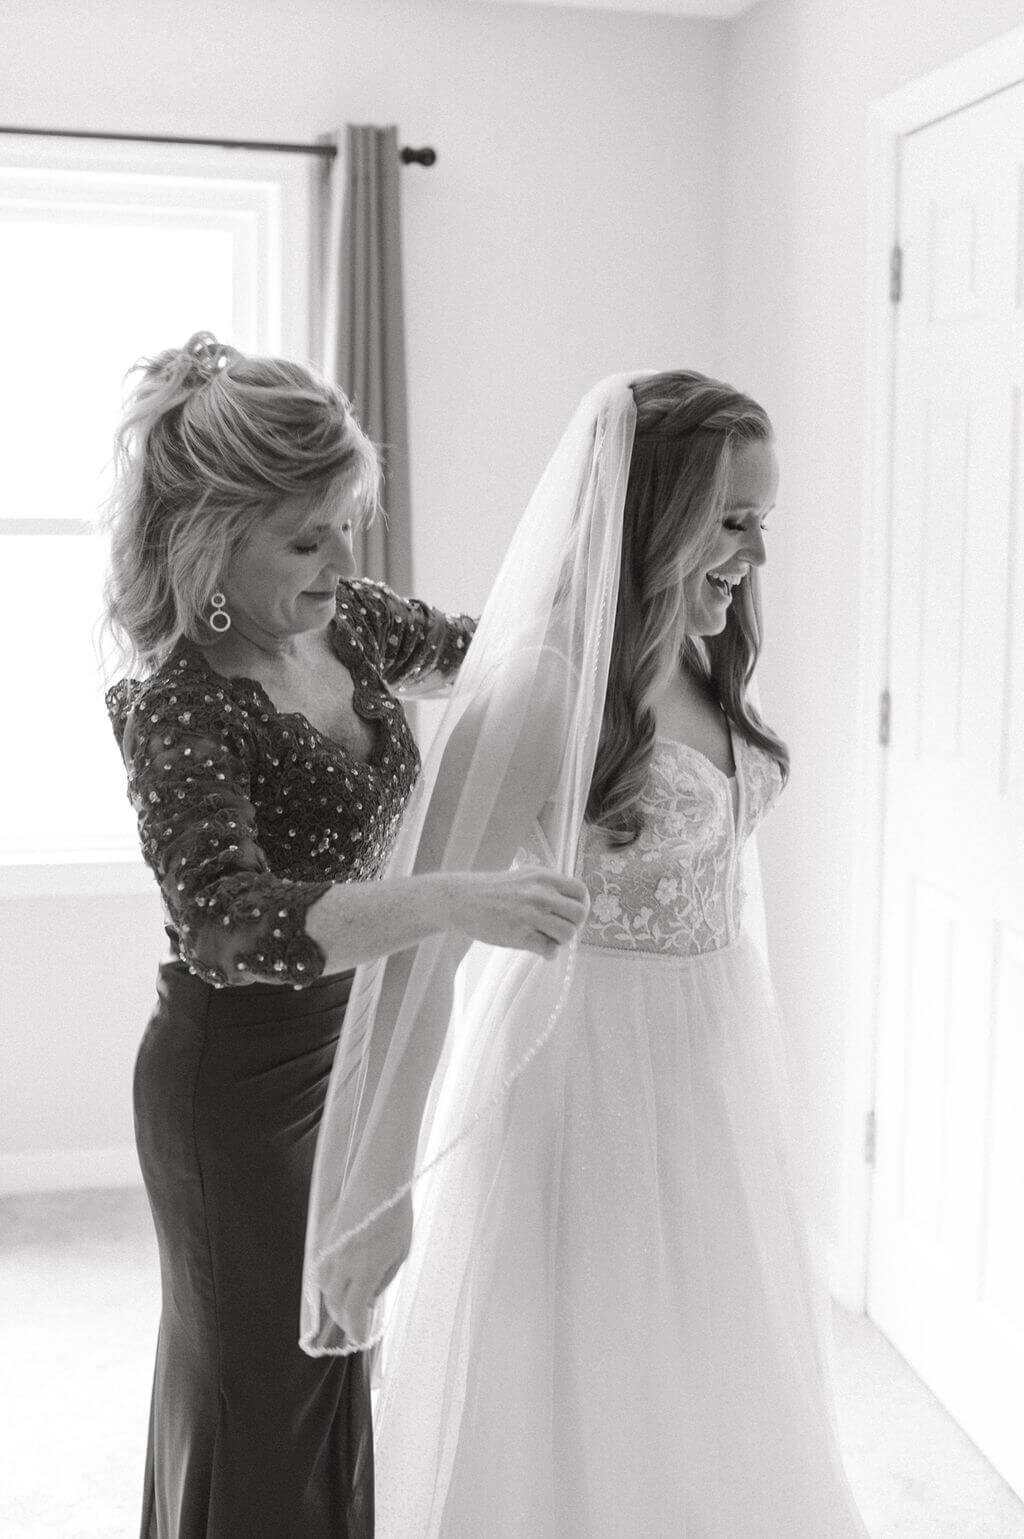 Intimate image of bride's mother fixing her veil during getting ready photos